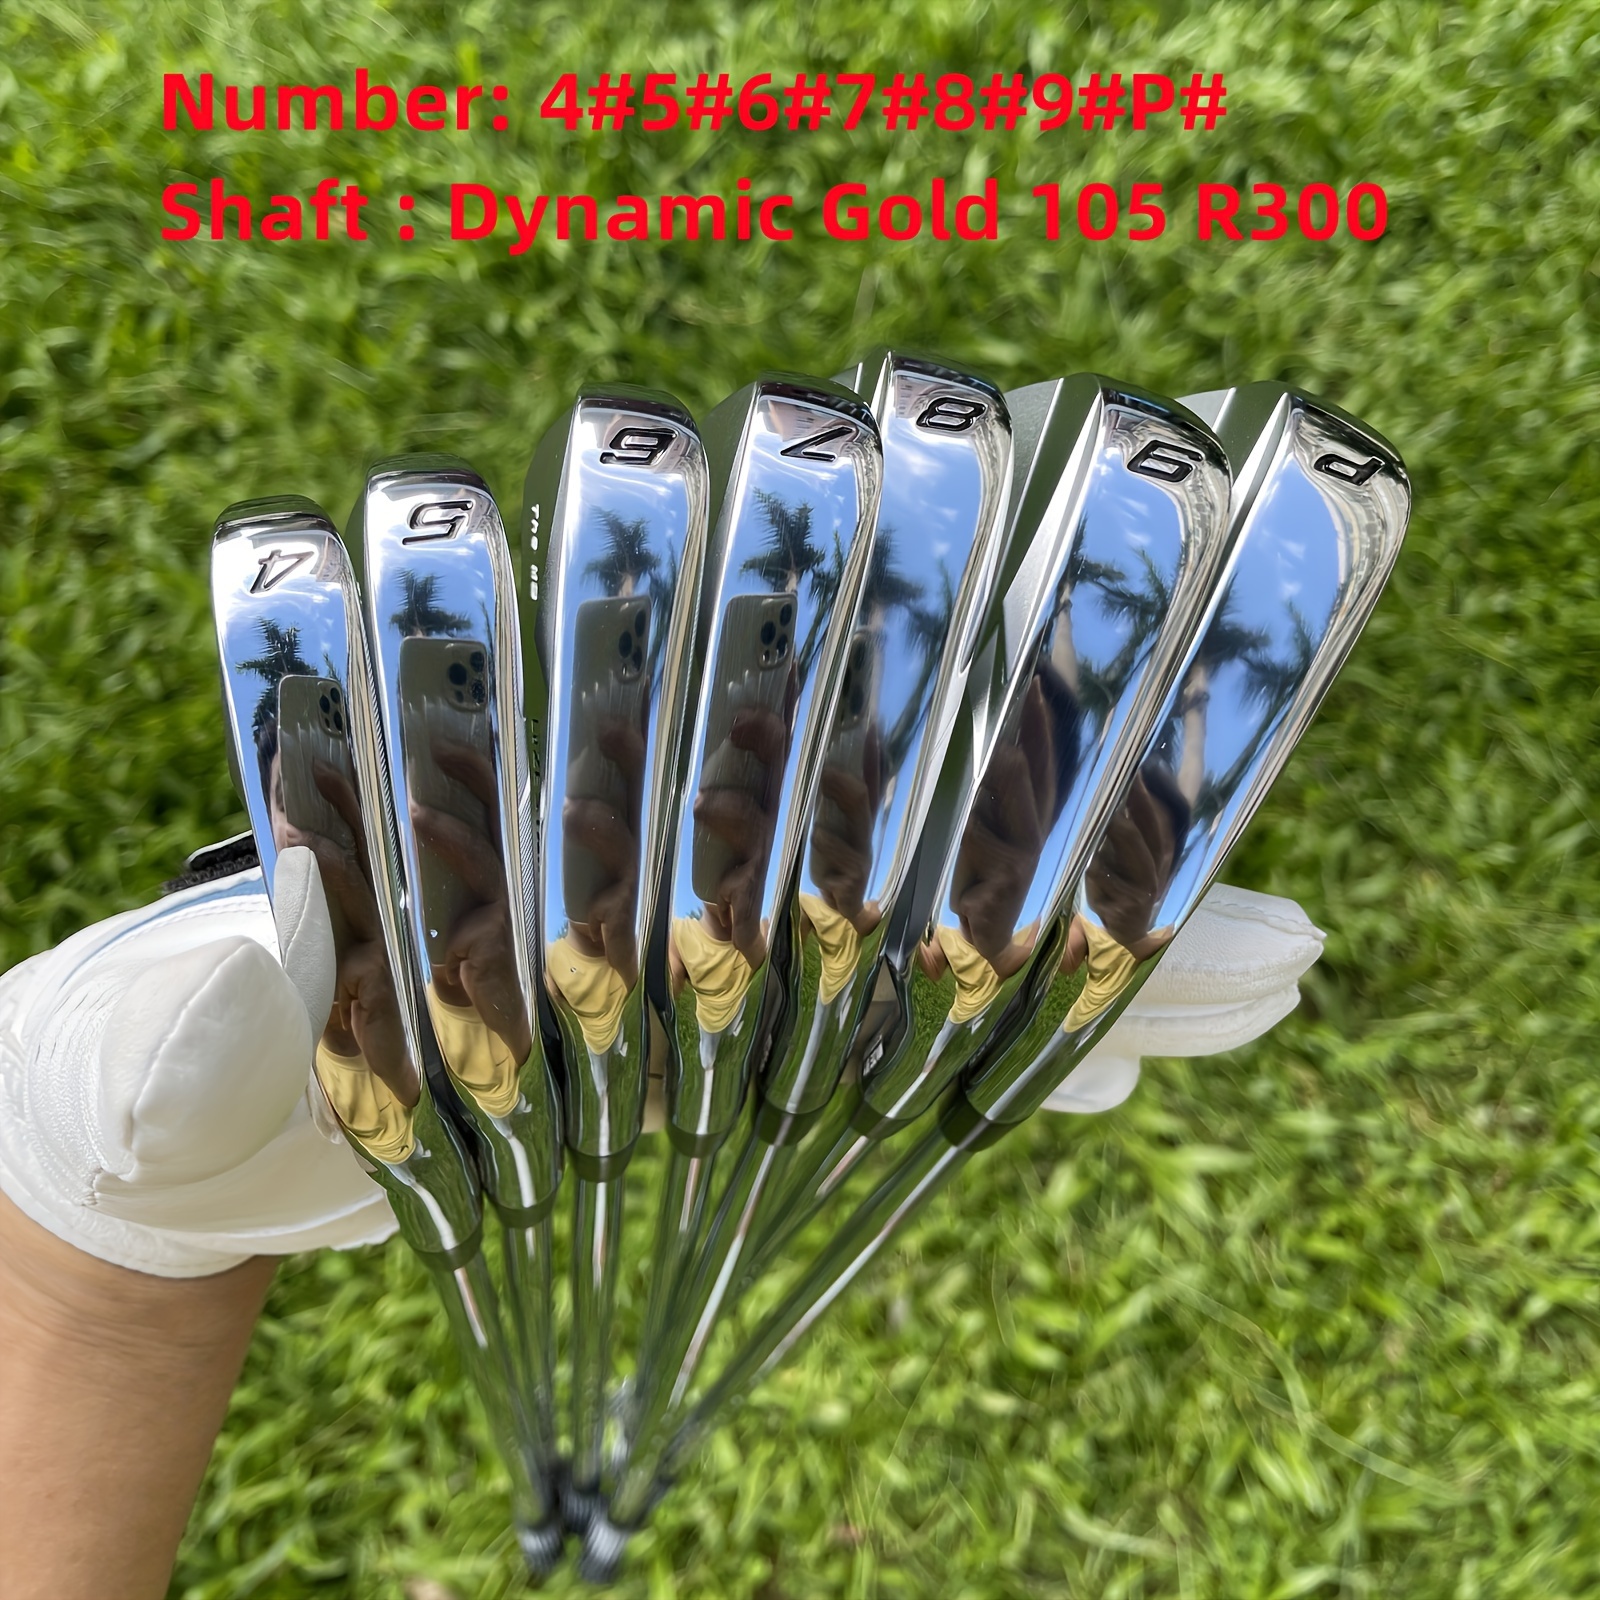 new golf irons s20c mb forged 4 5 6 7 8 9 p 7pcs set with dynamic gold 105 s300 steel shaft golf clubs